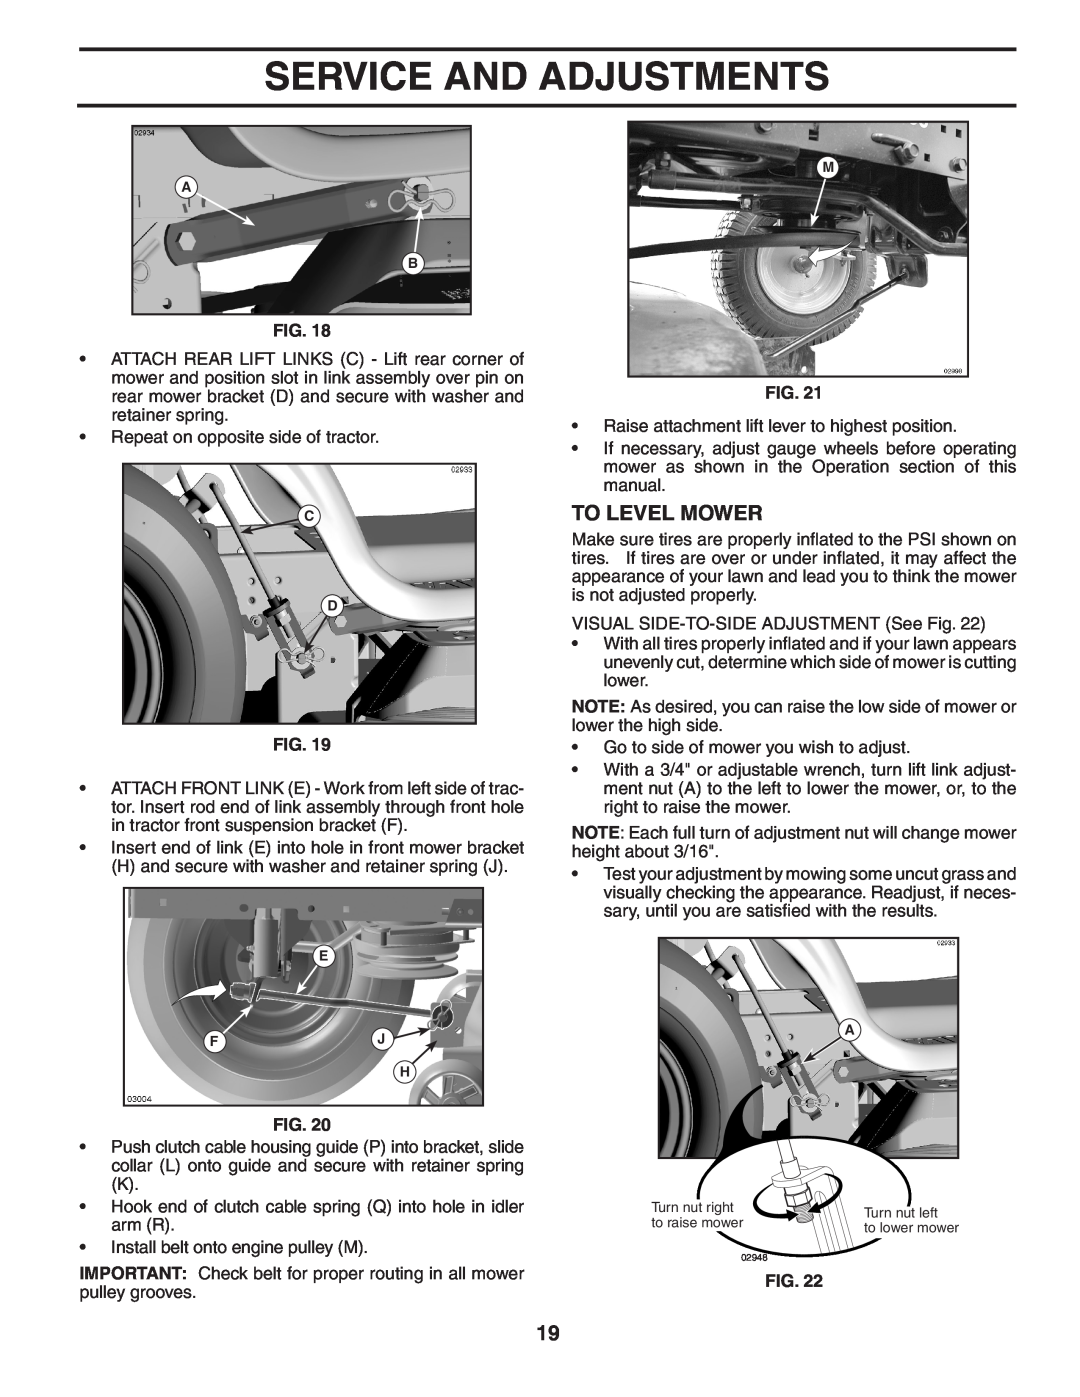 Poulan 403808 manual To Level Mower, Service And Adjustments, Turn nut right, Turn nut left, to raise mower 